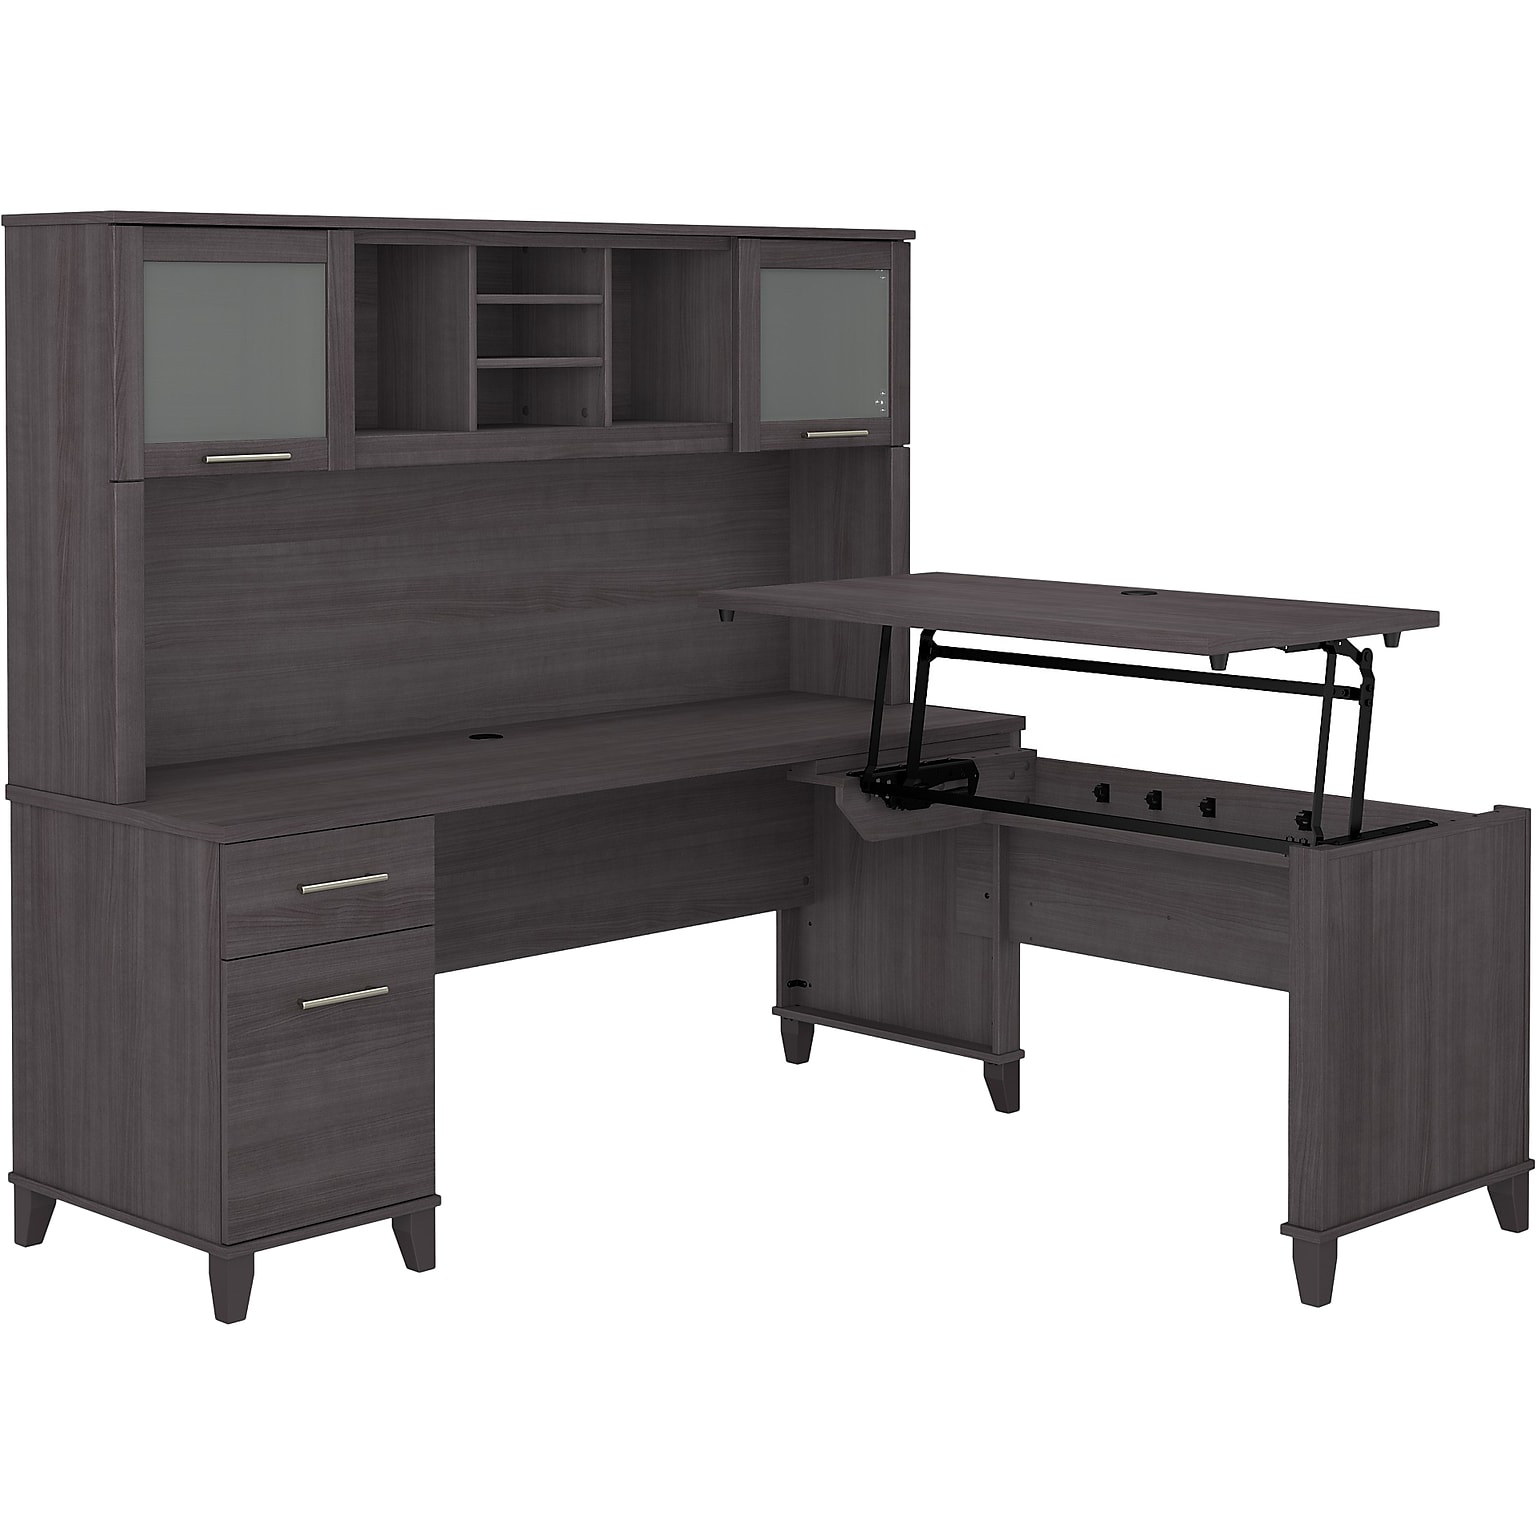 Bush Furniture Somerset 72W 3 Position Sit to Stand L Shaped Desk with Hutch, Storm Gray (SET015SG)